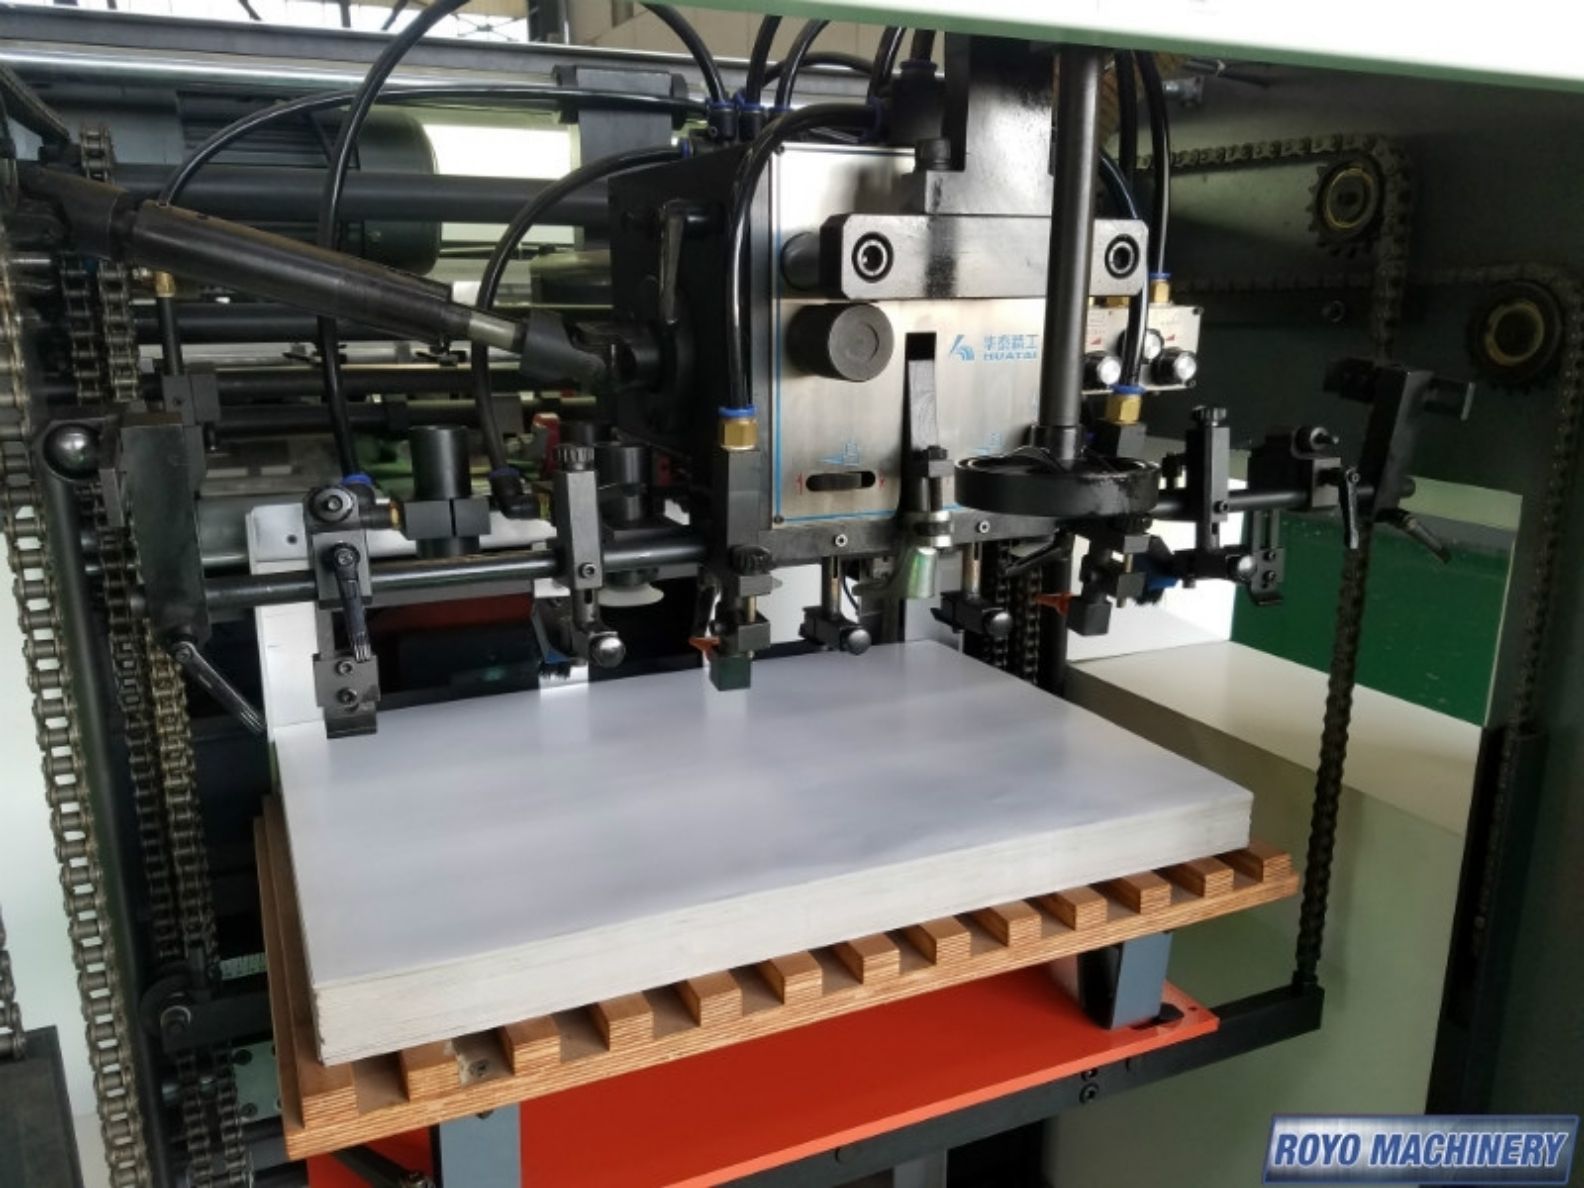 Successful installation by The Royo Machinery Team - Die Cutter Royo Machinery RHT-760